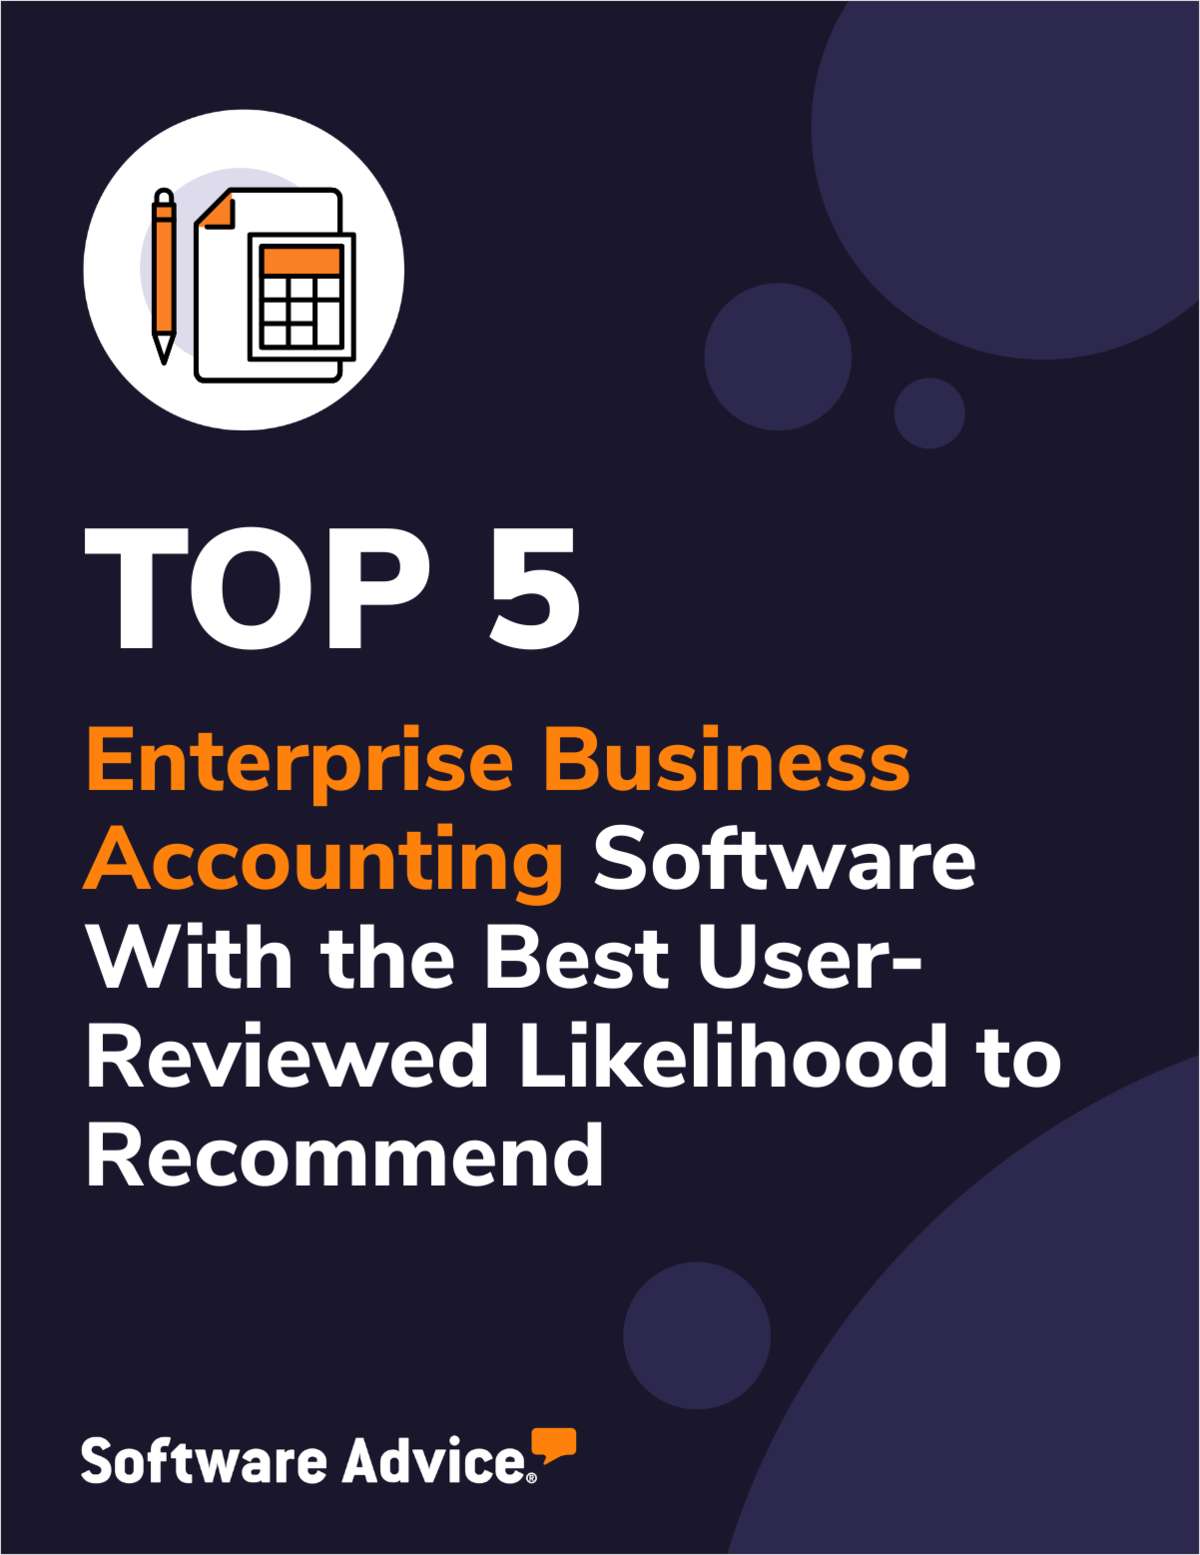 Top 5 Enterprise Business Accounting Software With the Best User Reviewed Likelihood to Recommend